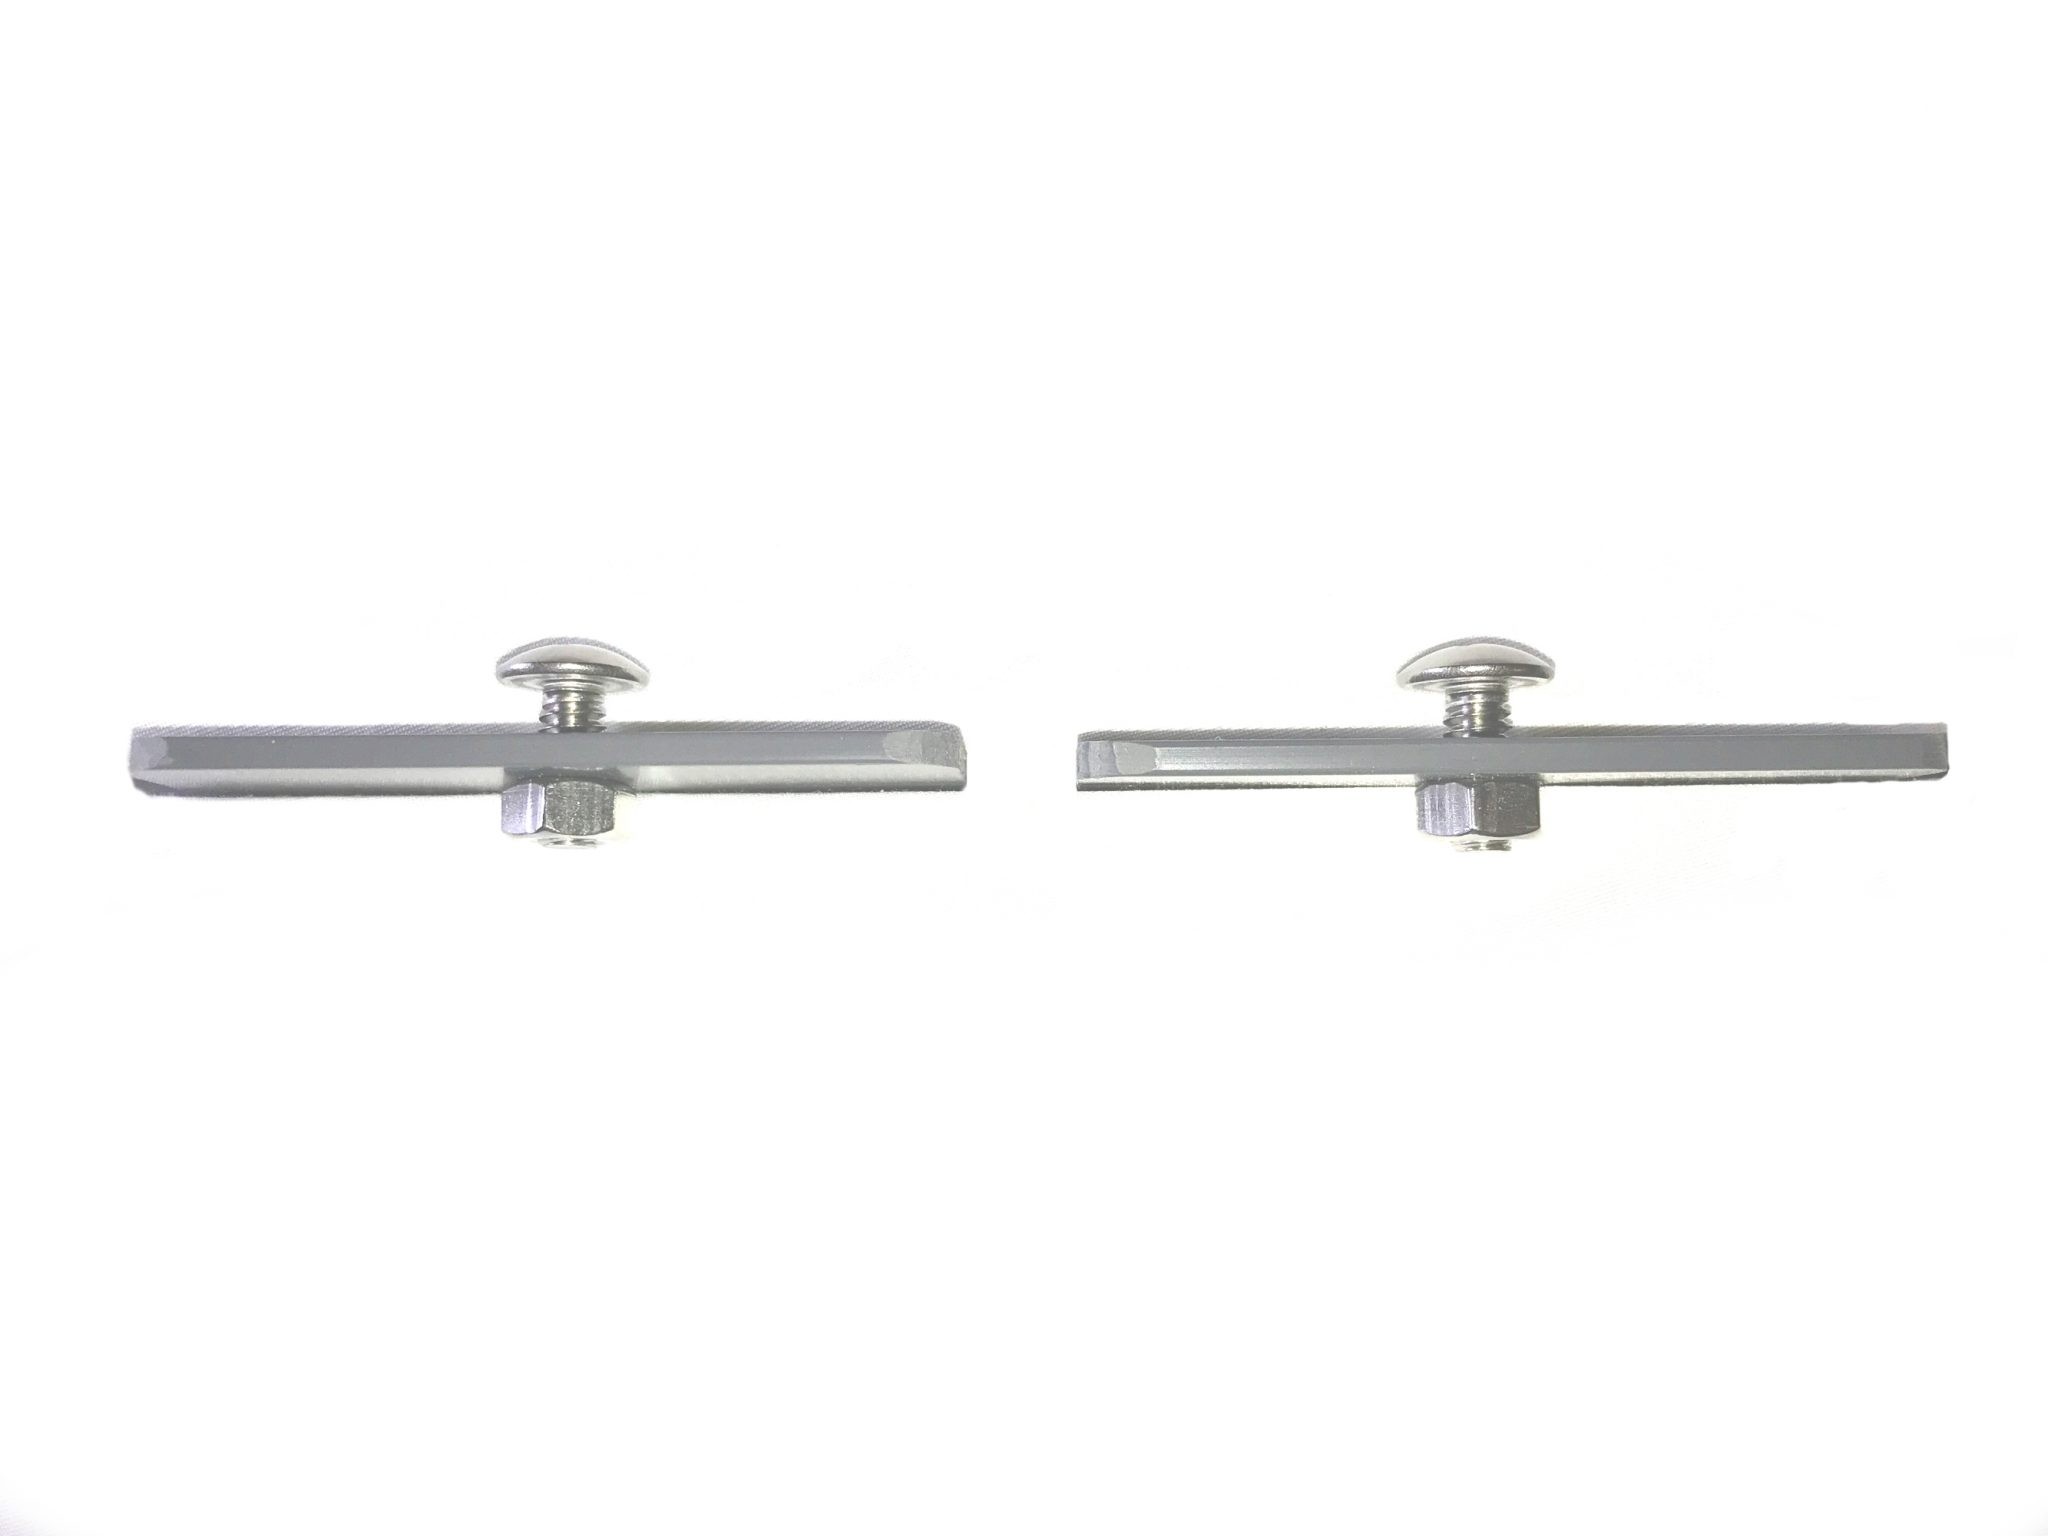 Clips for panels without screws. Price per pair. - Electrical Panel Lockout